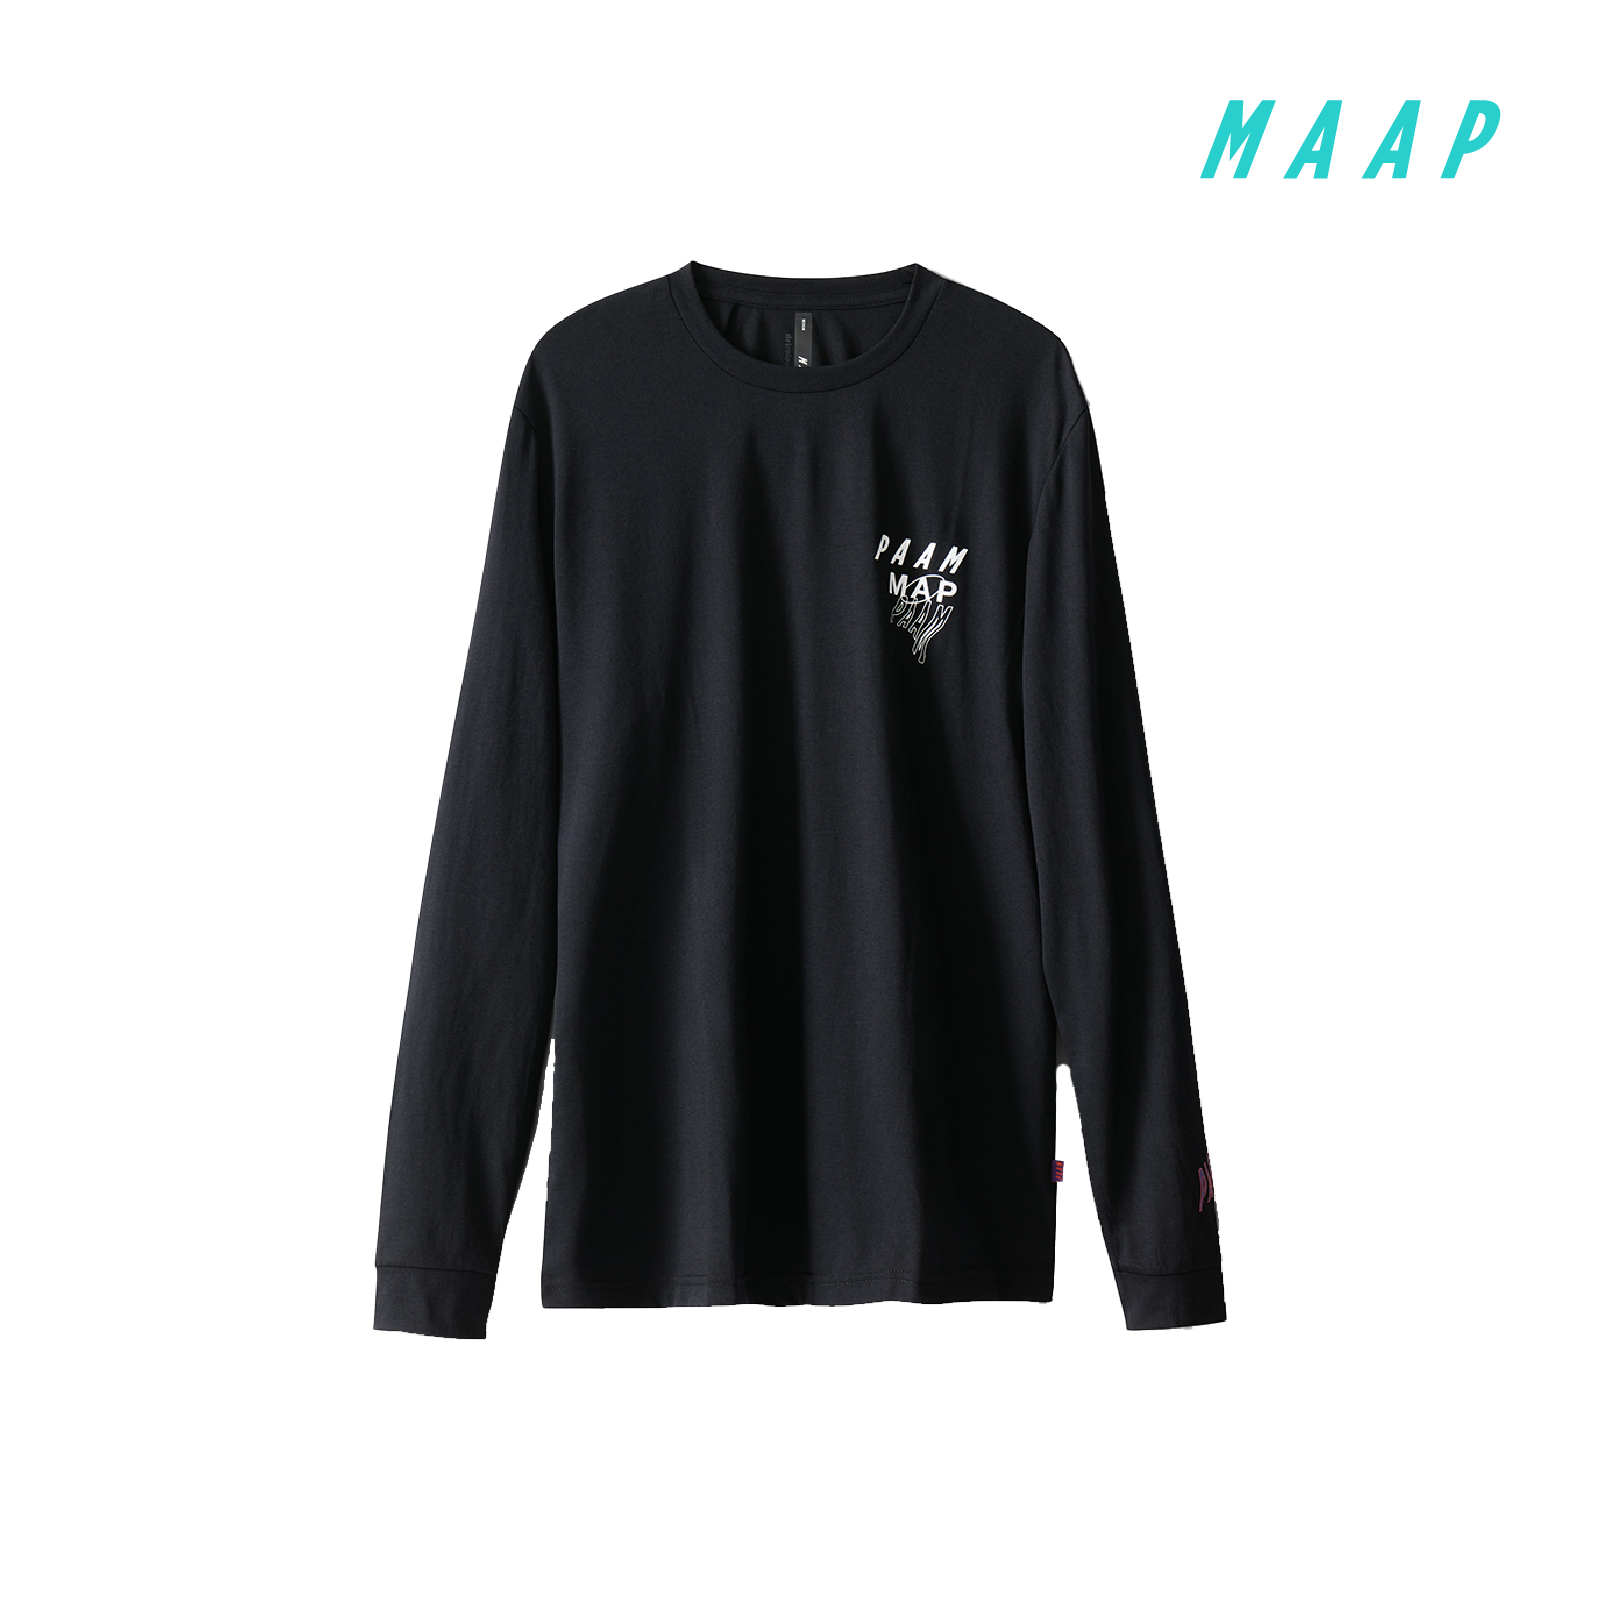 MAAP X PAM LS Tee Black – YW Collection